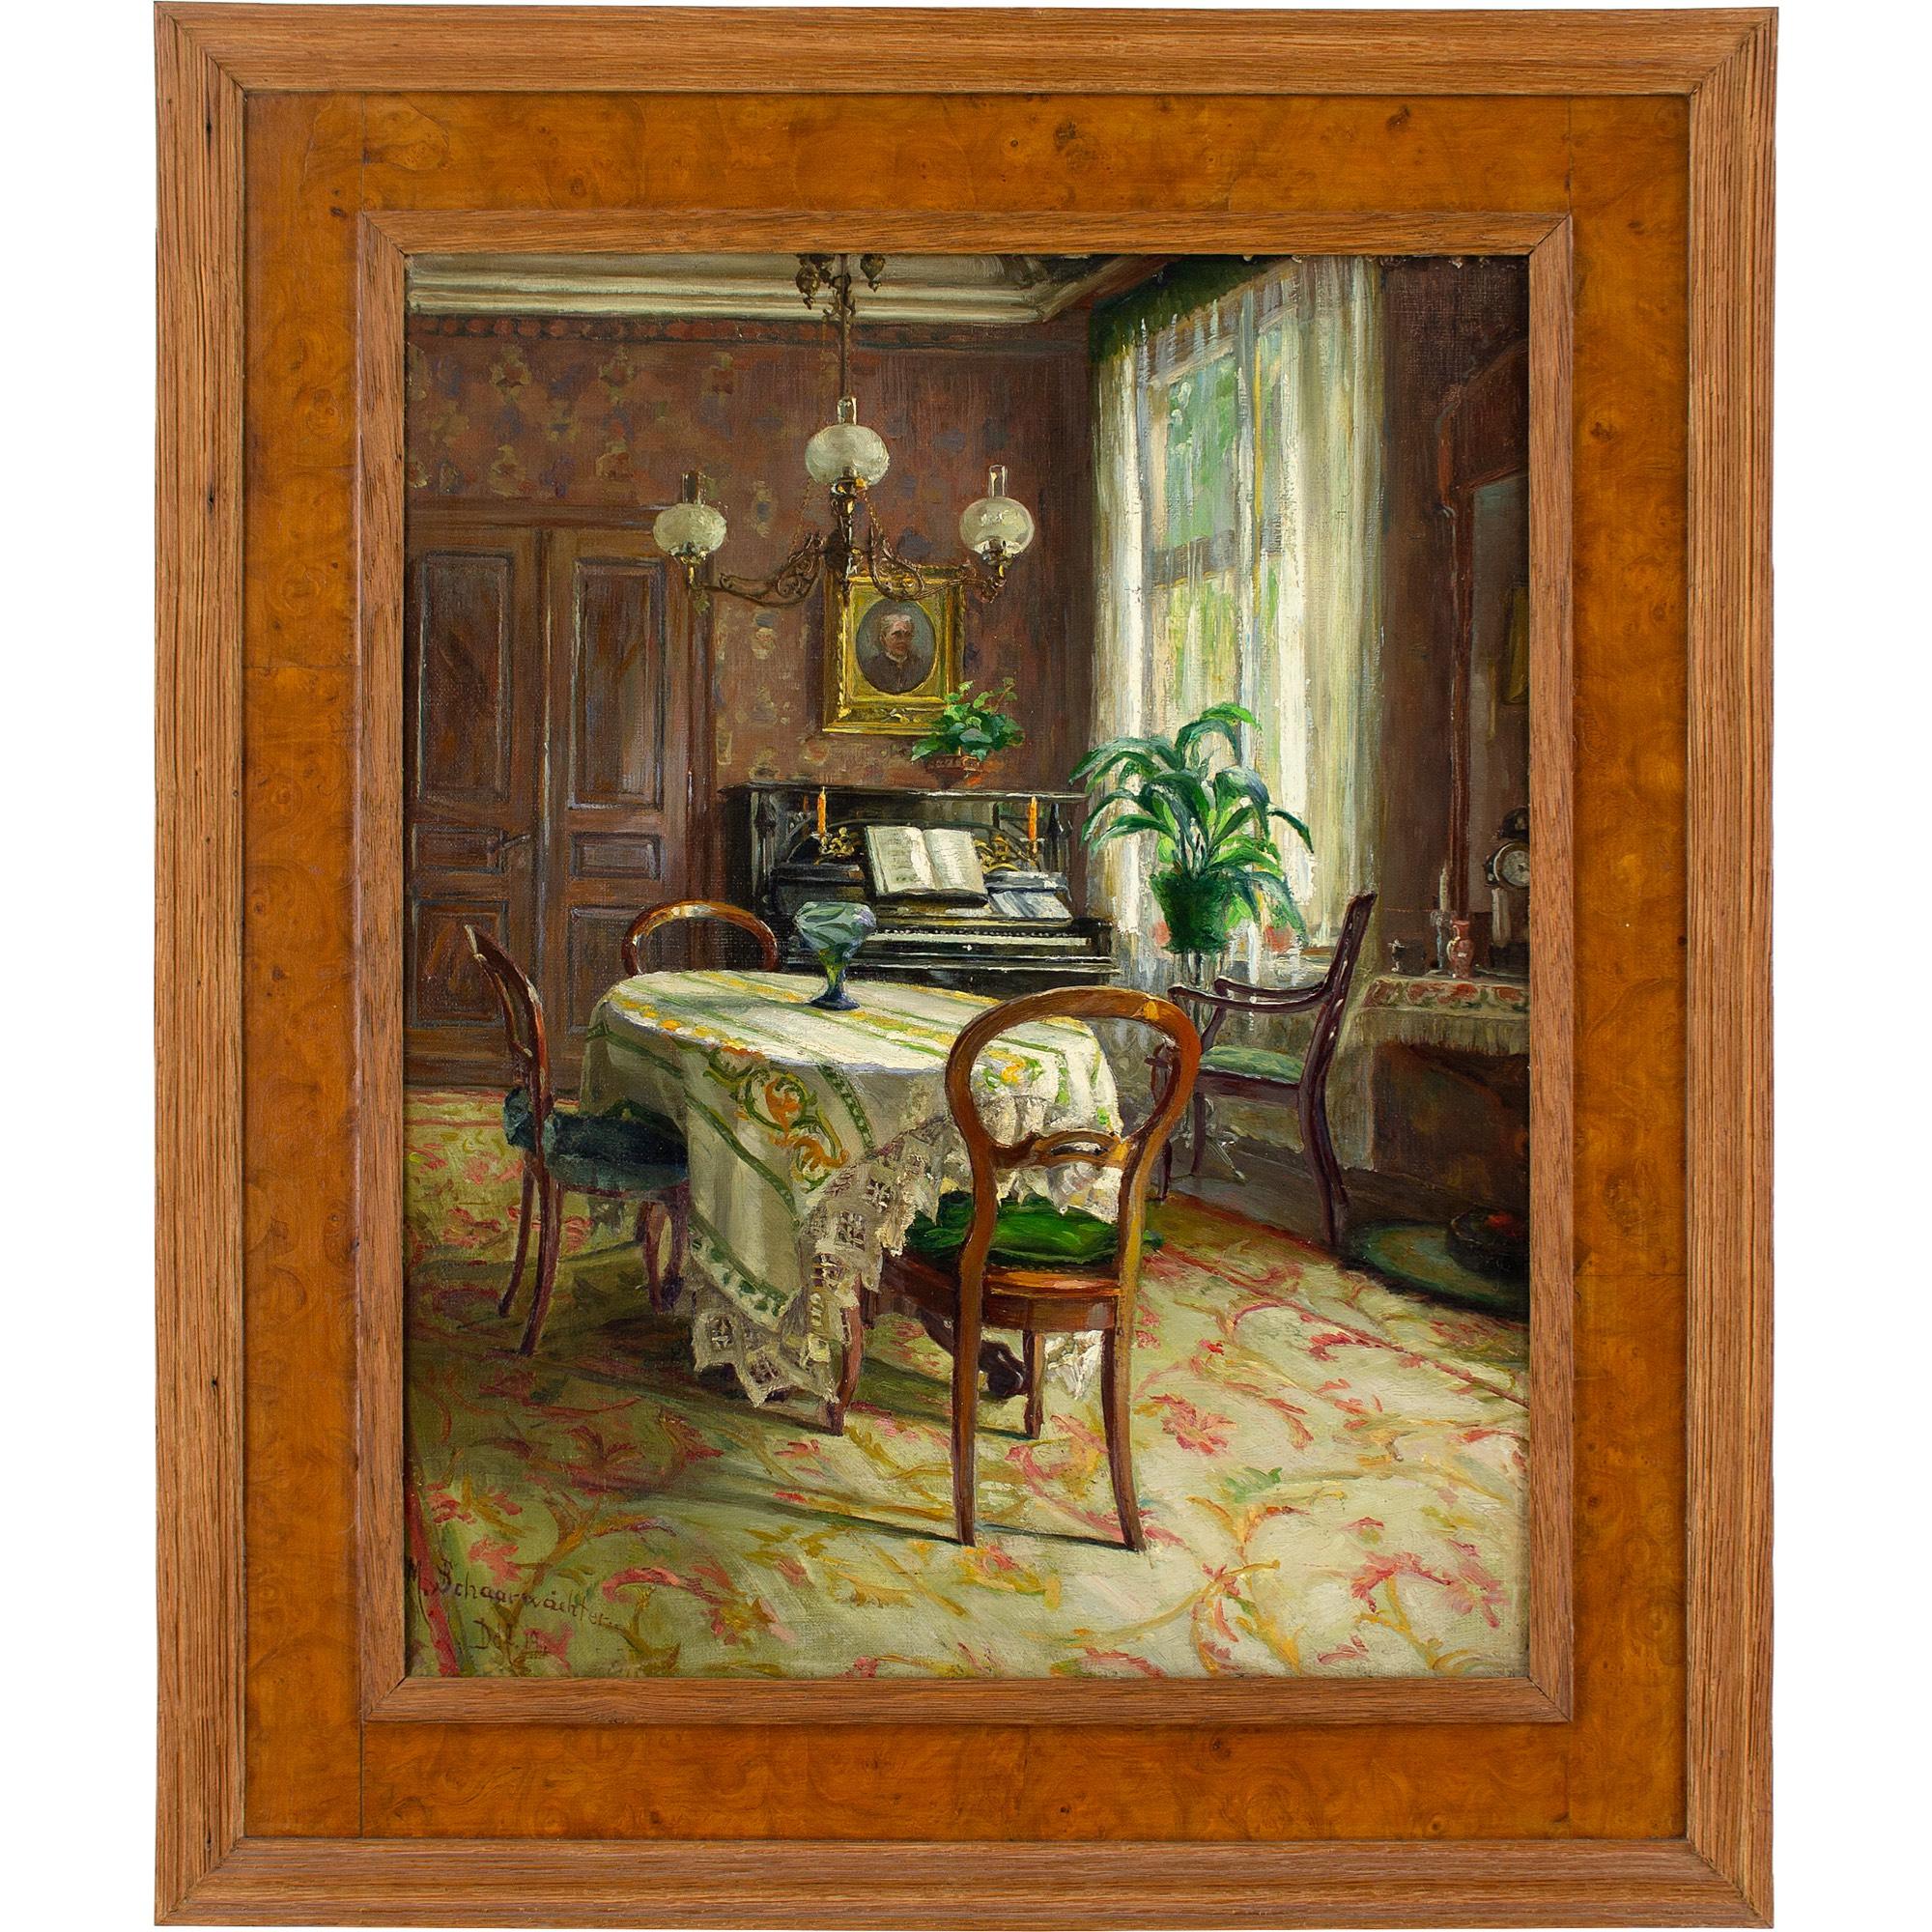 Unknown Interior Painting - Early 20th-Century German School, Interior With Dining Table & Piano